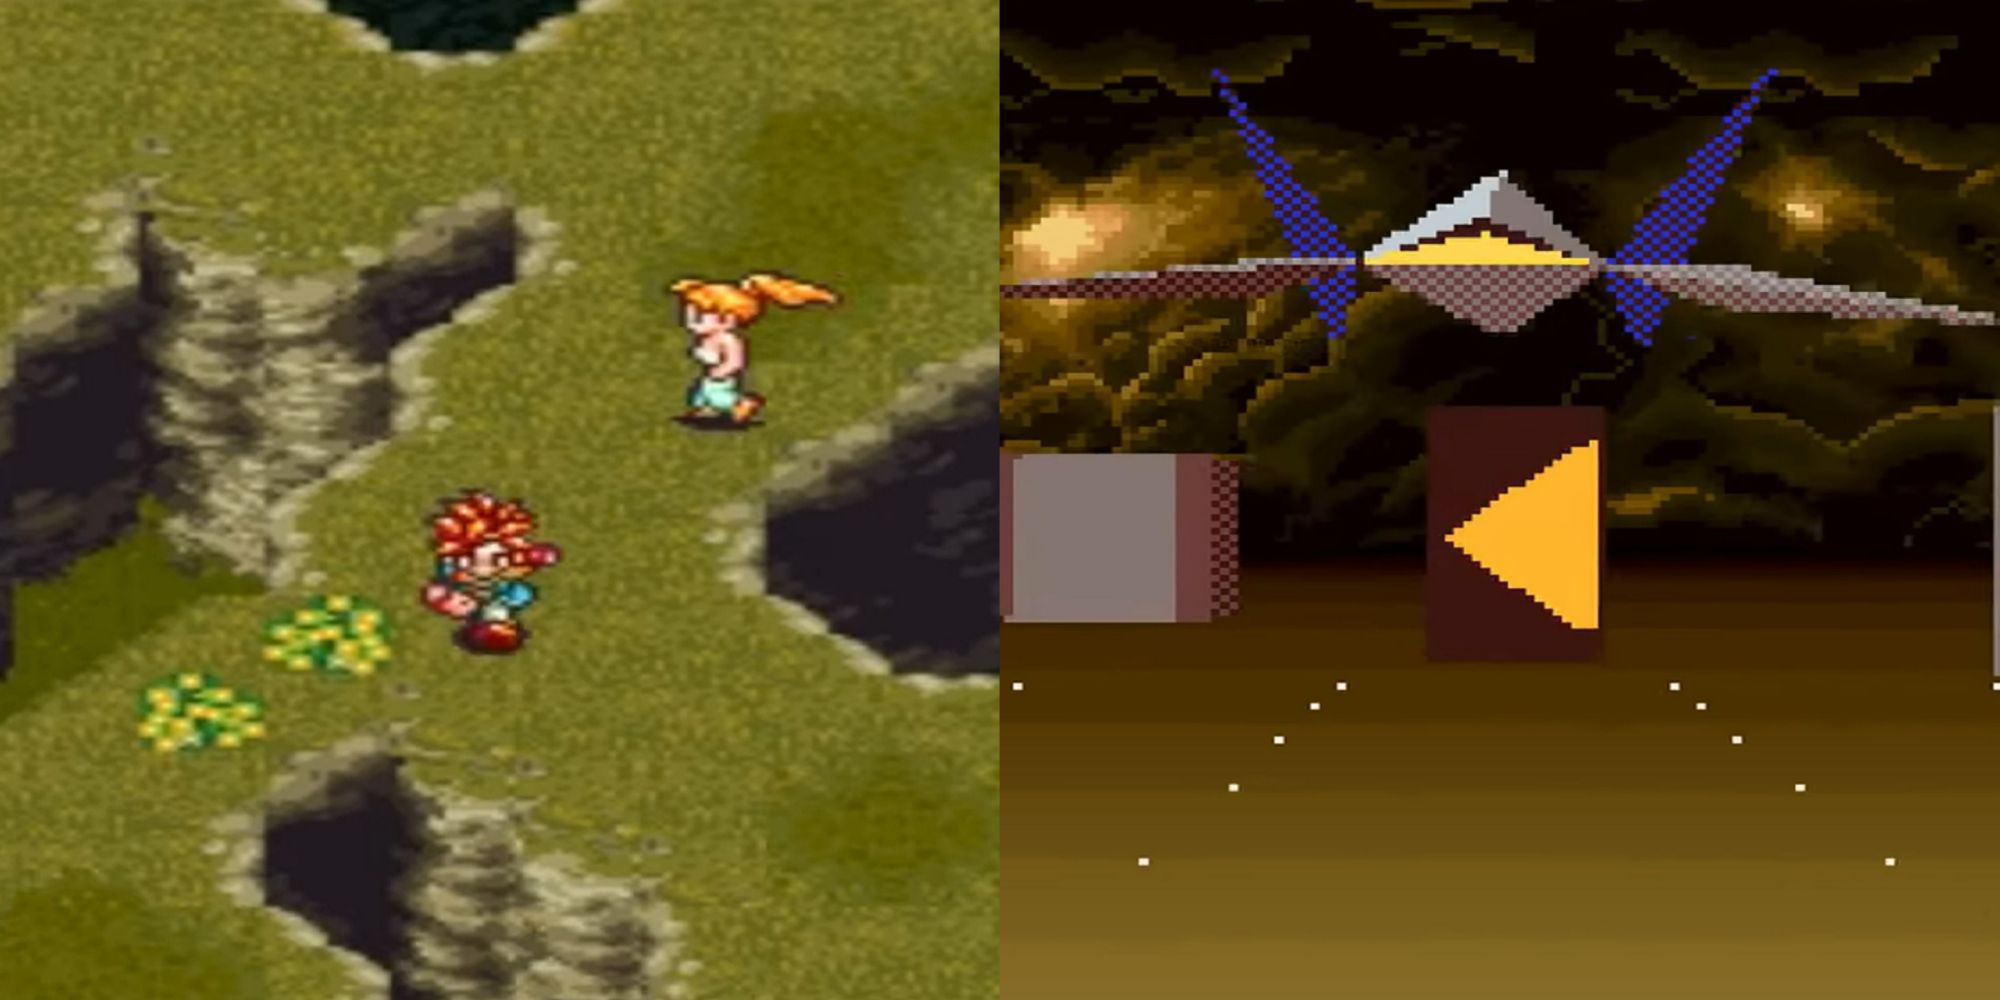 Split image screenshots of Crono and Marle in Chrono Trigger and a spaceship from Starfox on SNES